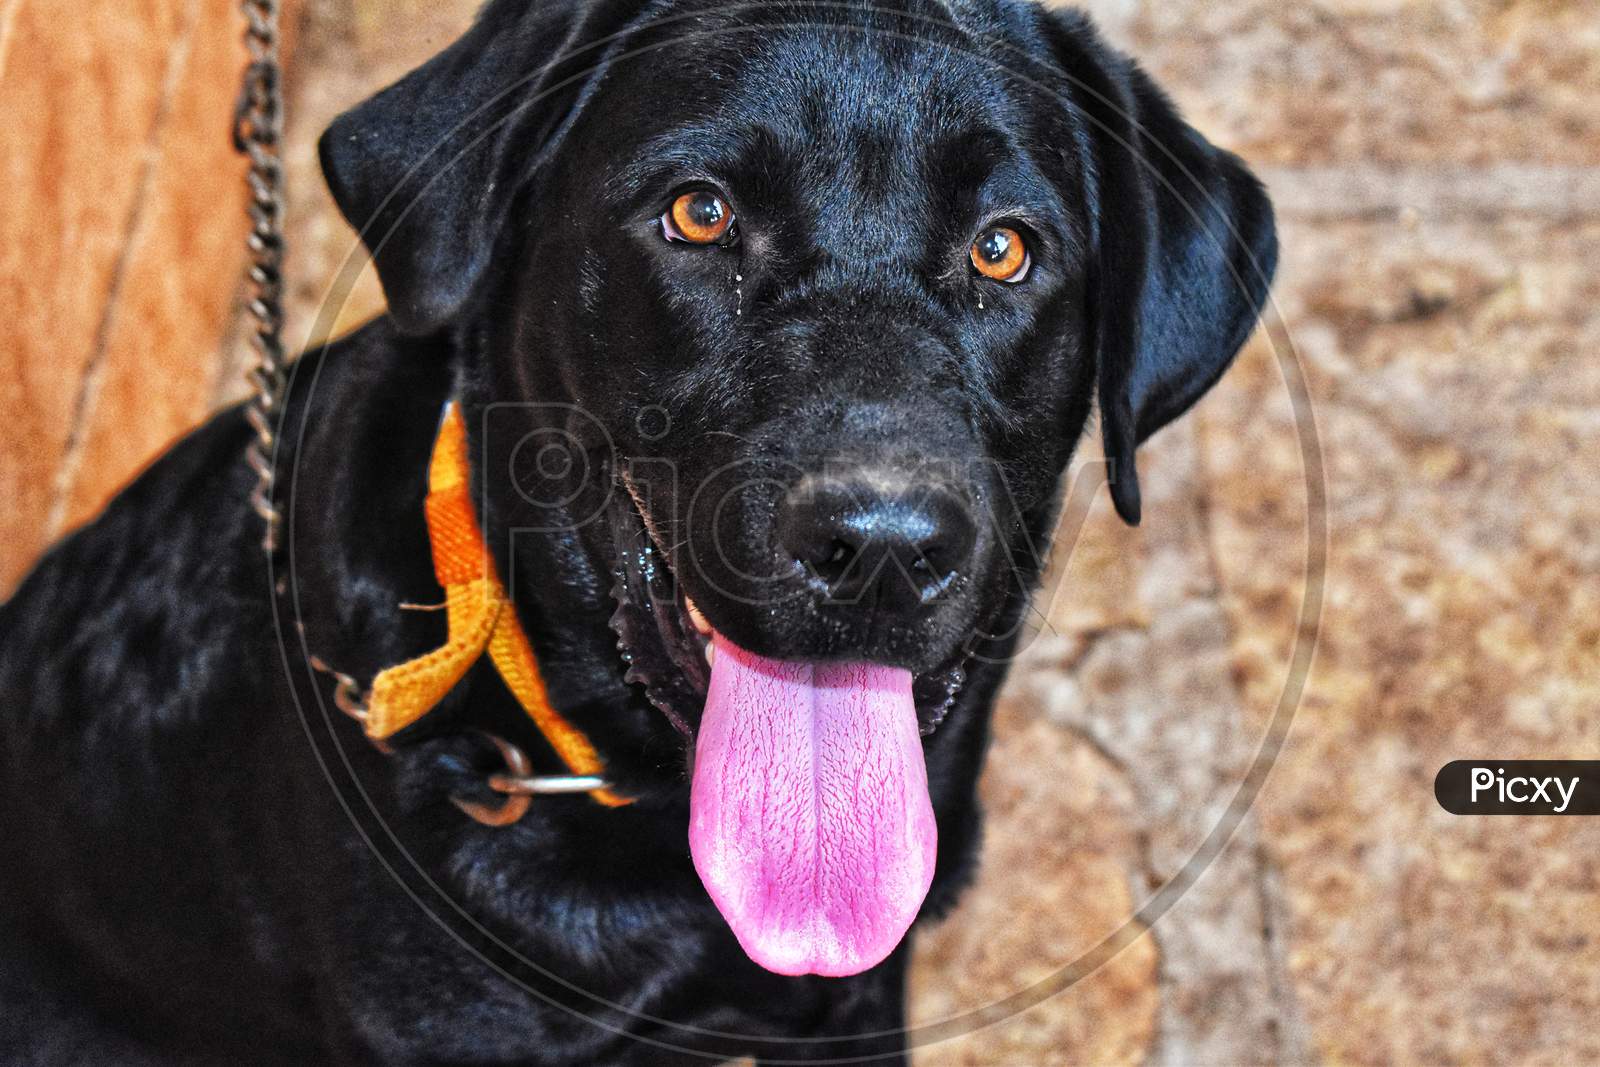 A Black Labrador Dog With Sharp Eyes . Its Pink Tongue Is Outside . A Belt Is Tied To Its Neck